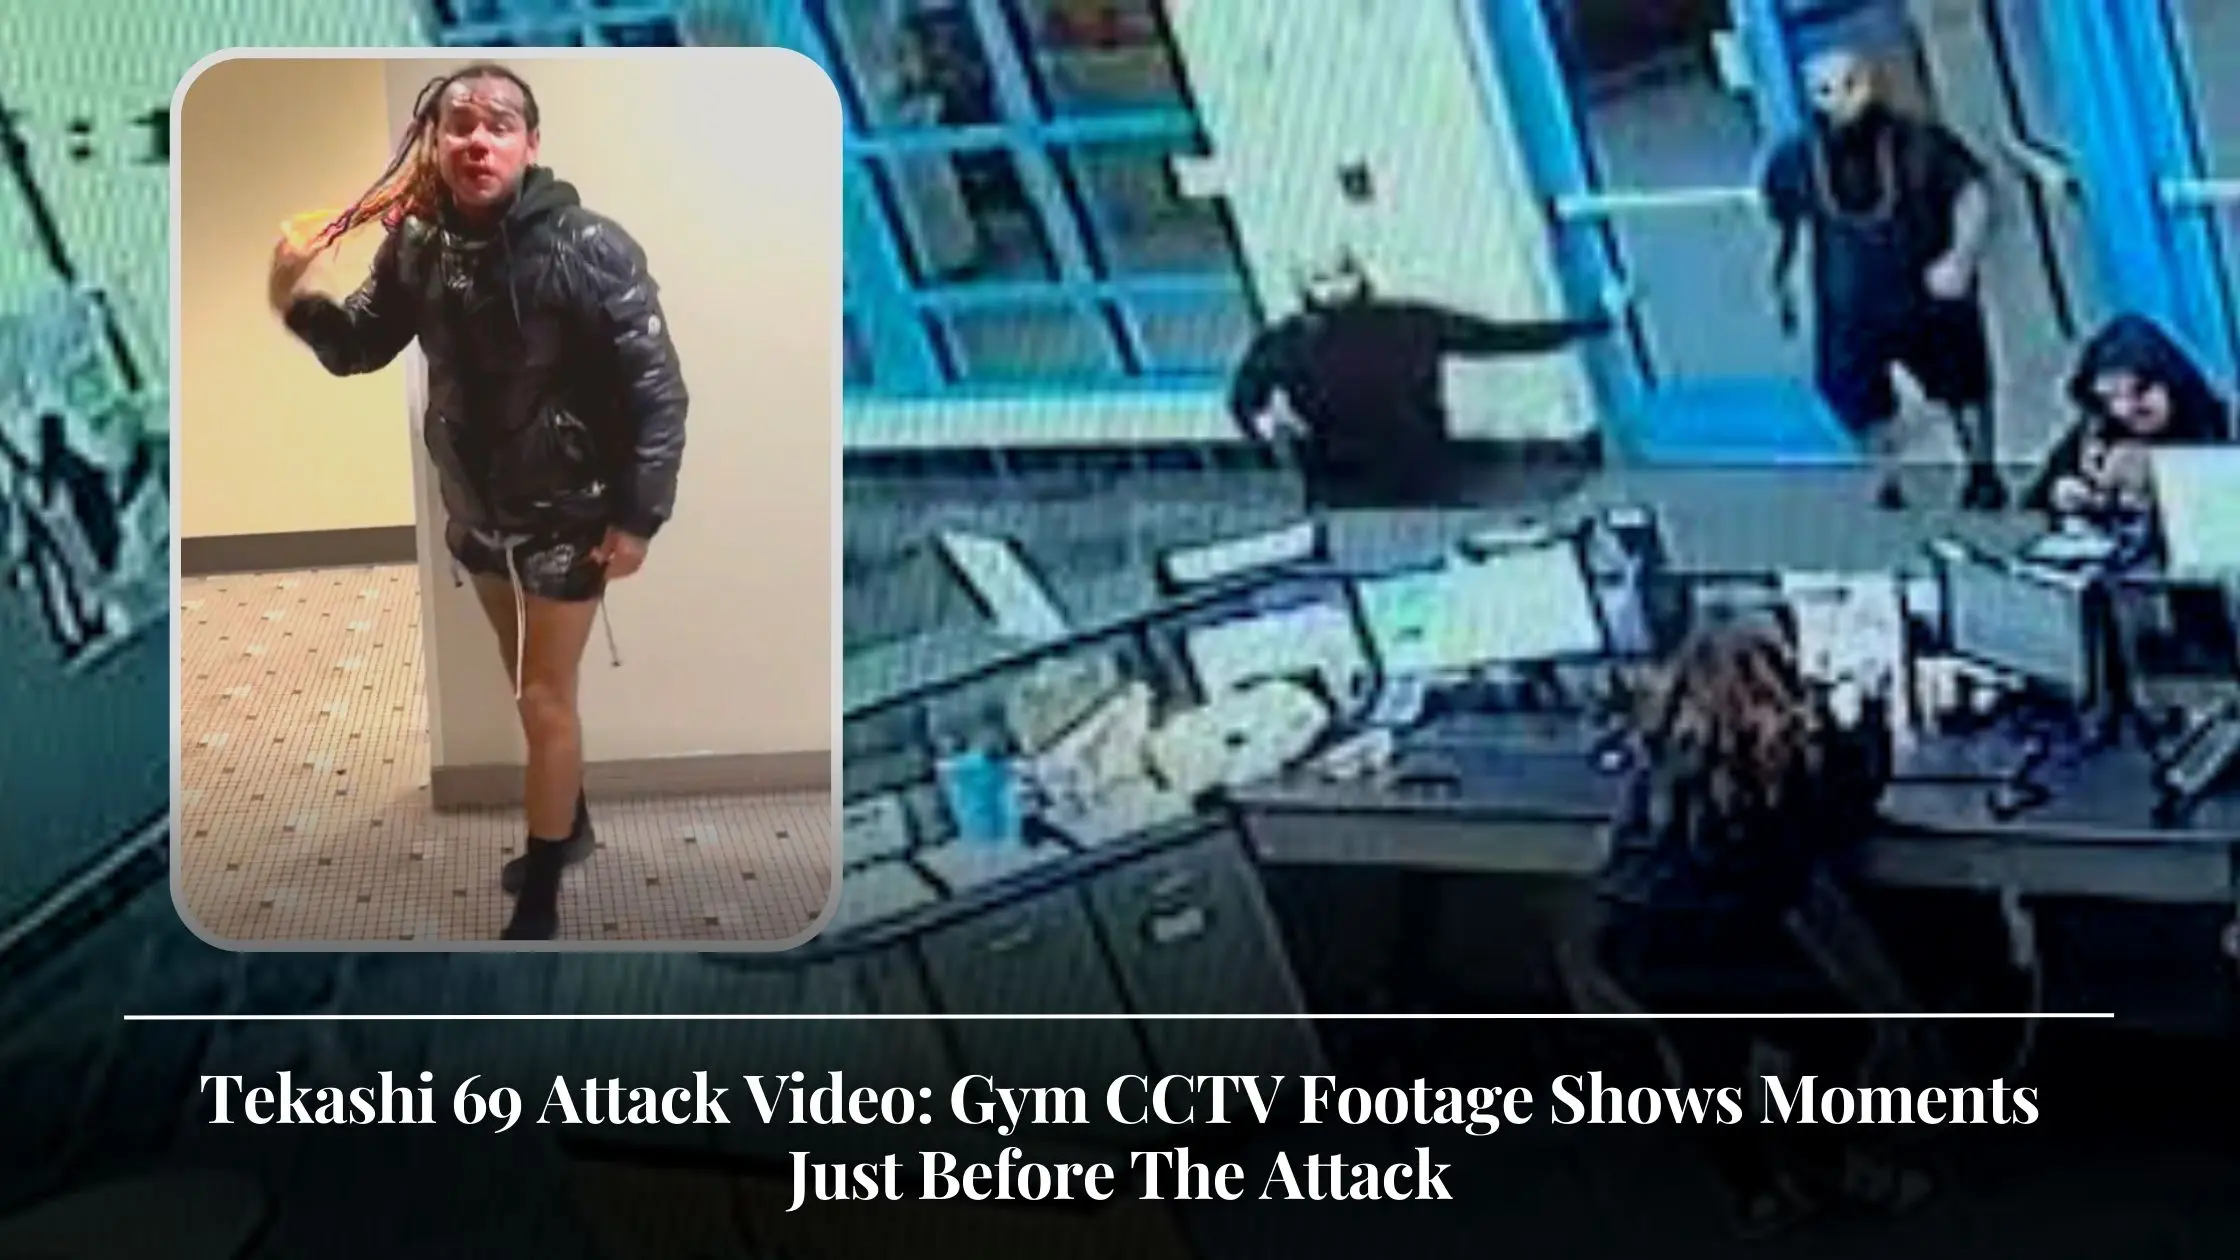 Tekashi 69 Attack Video Gym CCTV Footage Shows Moments Just Before The Attack